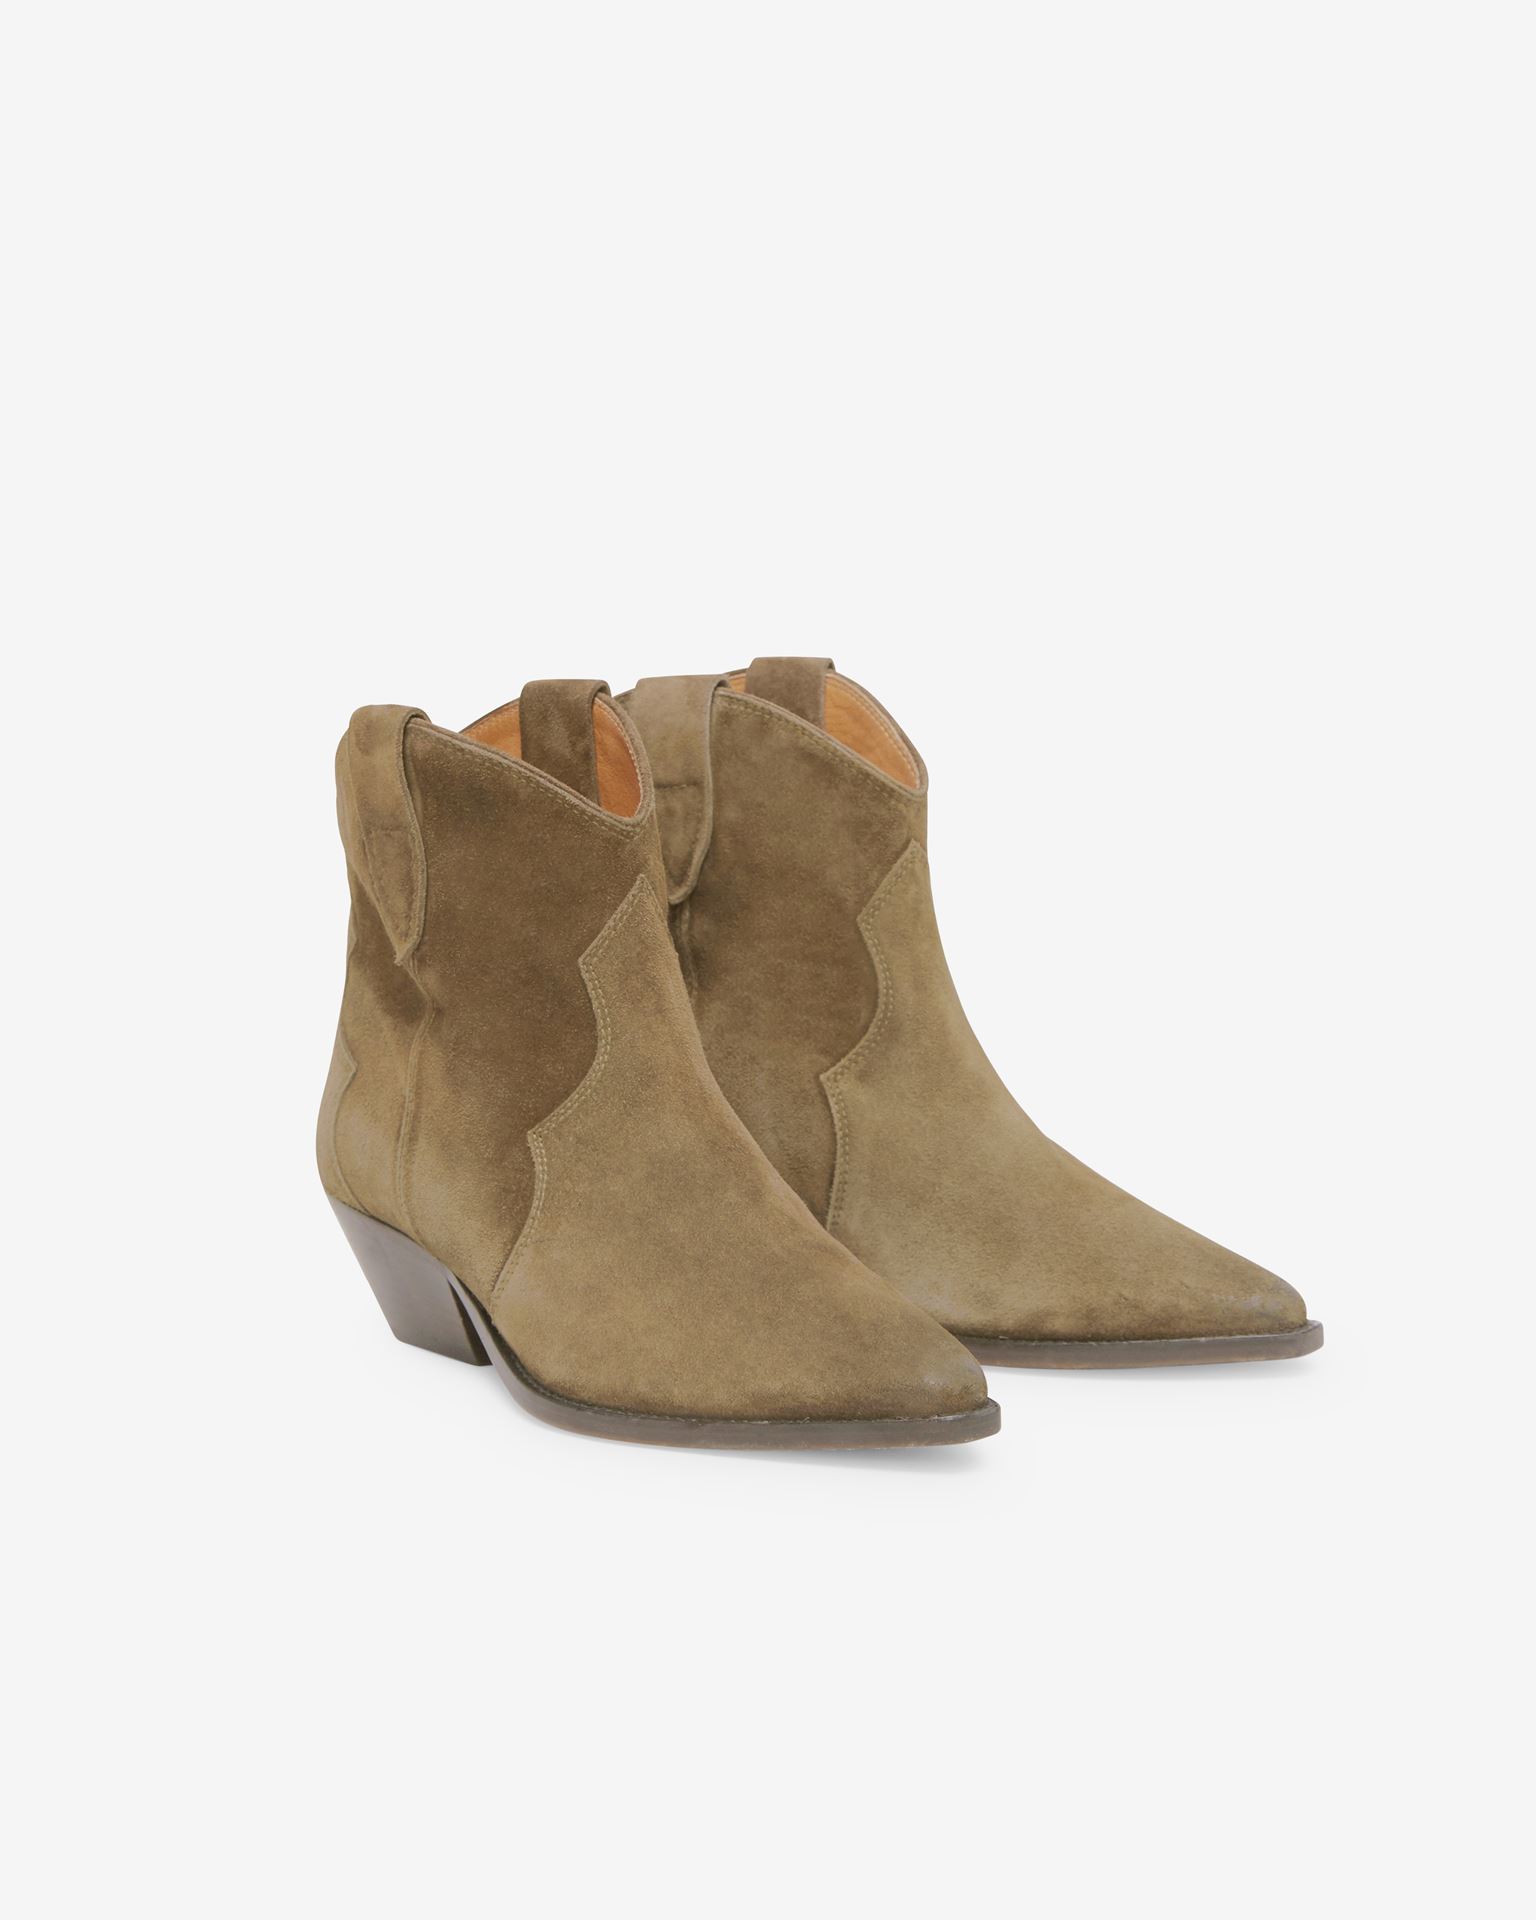 Isabel Marant, Dewina Leather Ankle Boots - Women - Grey